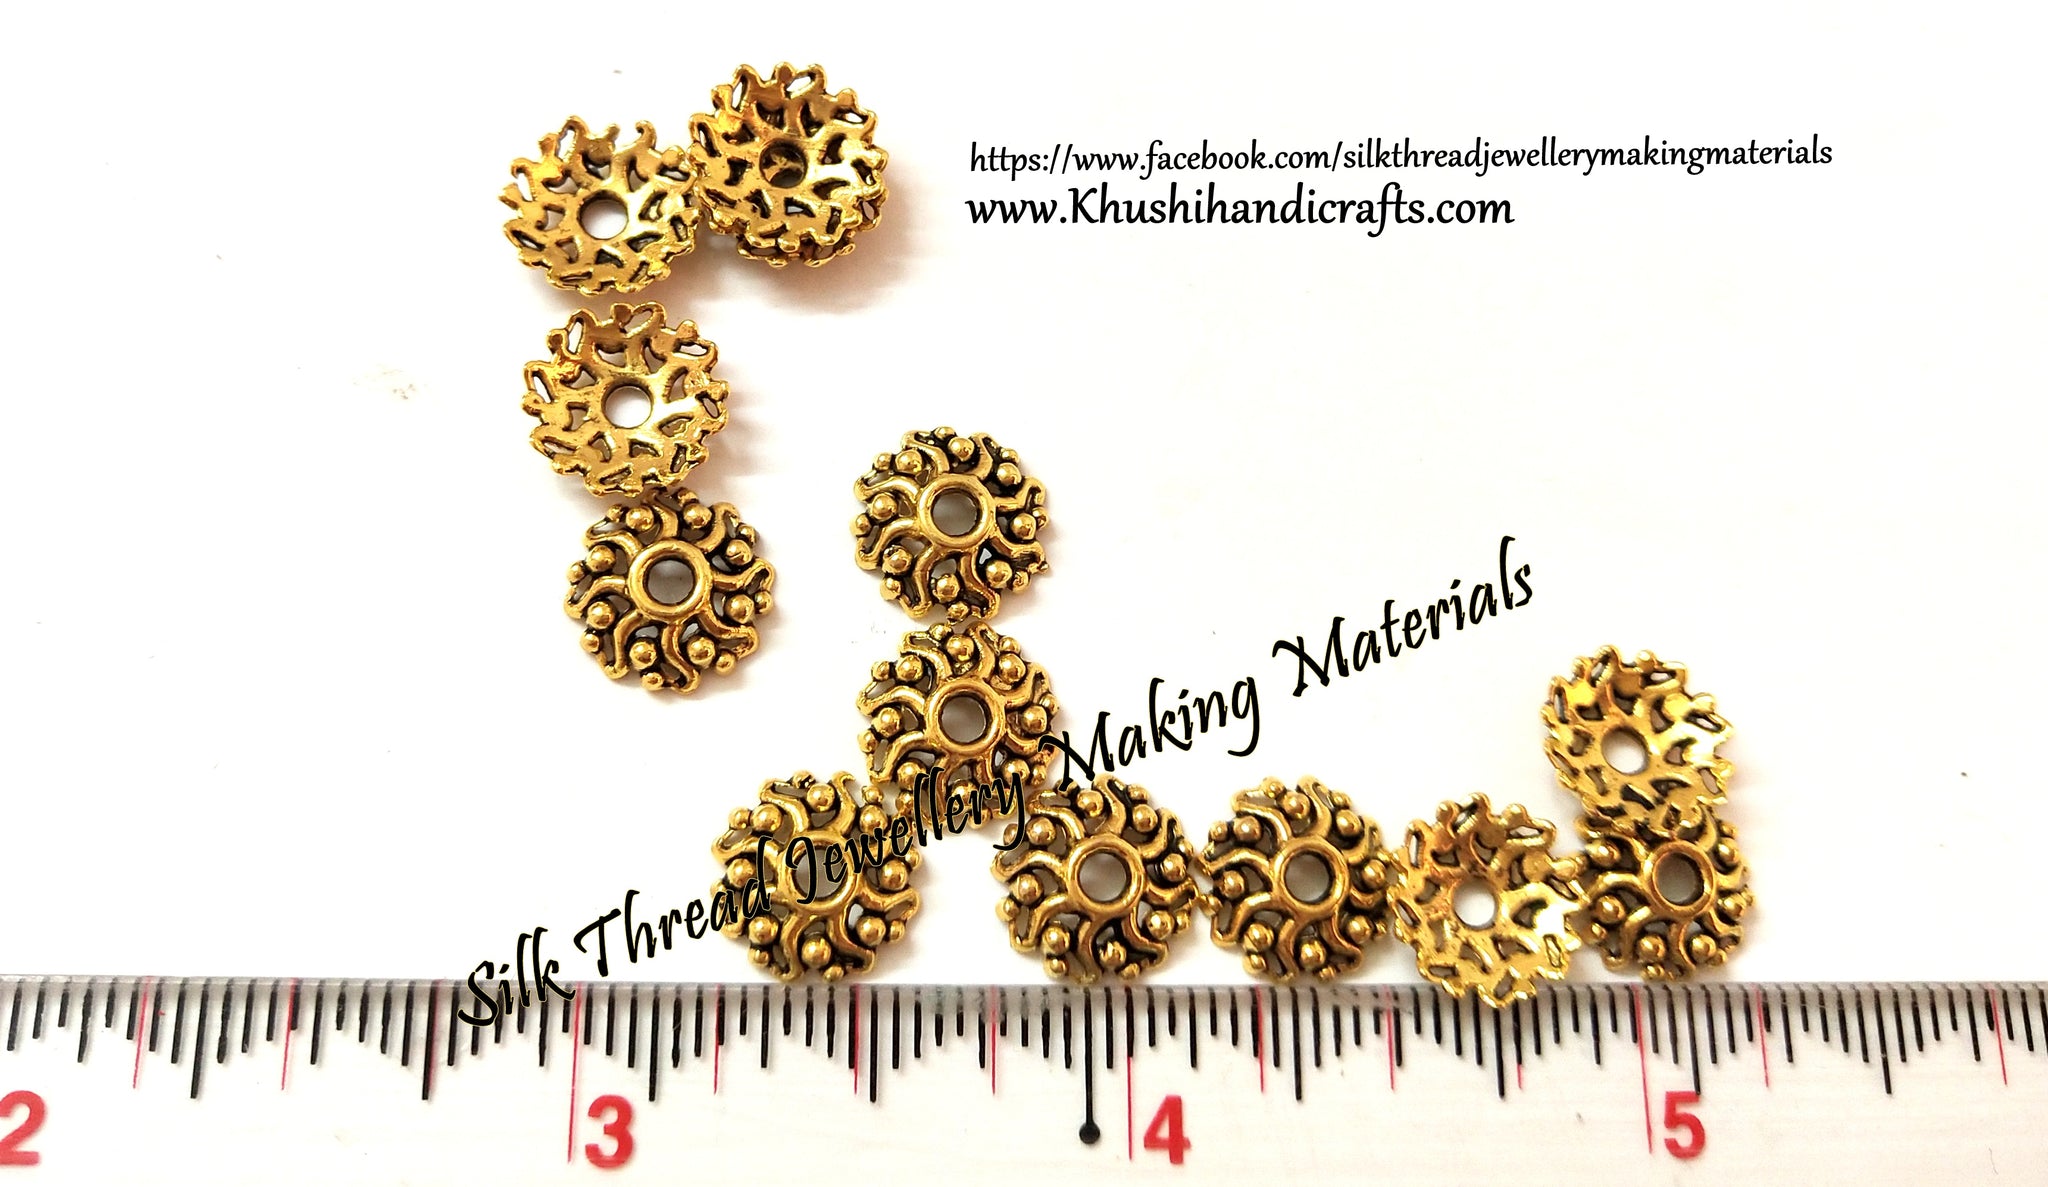 JBN Jewels Bead Caps For Jewelry, Pack of 50 - Bead Caps For Jewelry, Pack  of 50 . shop for JBN Jewels products in India.